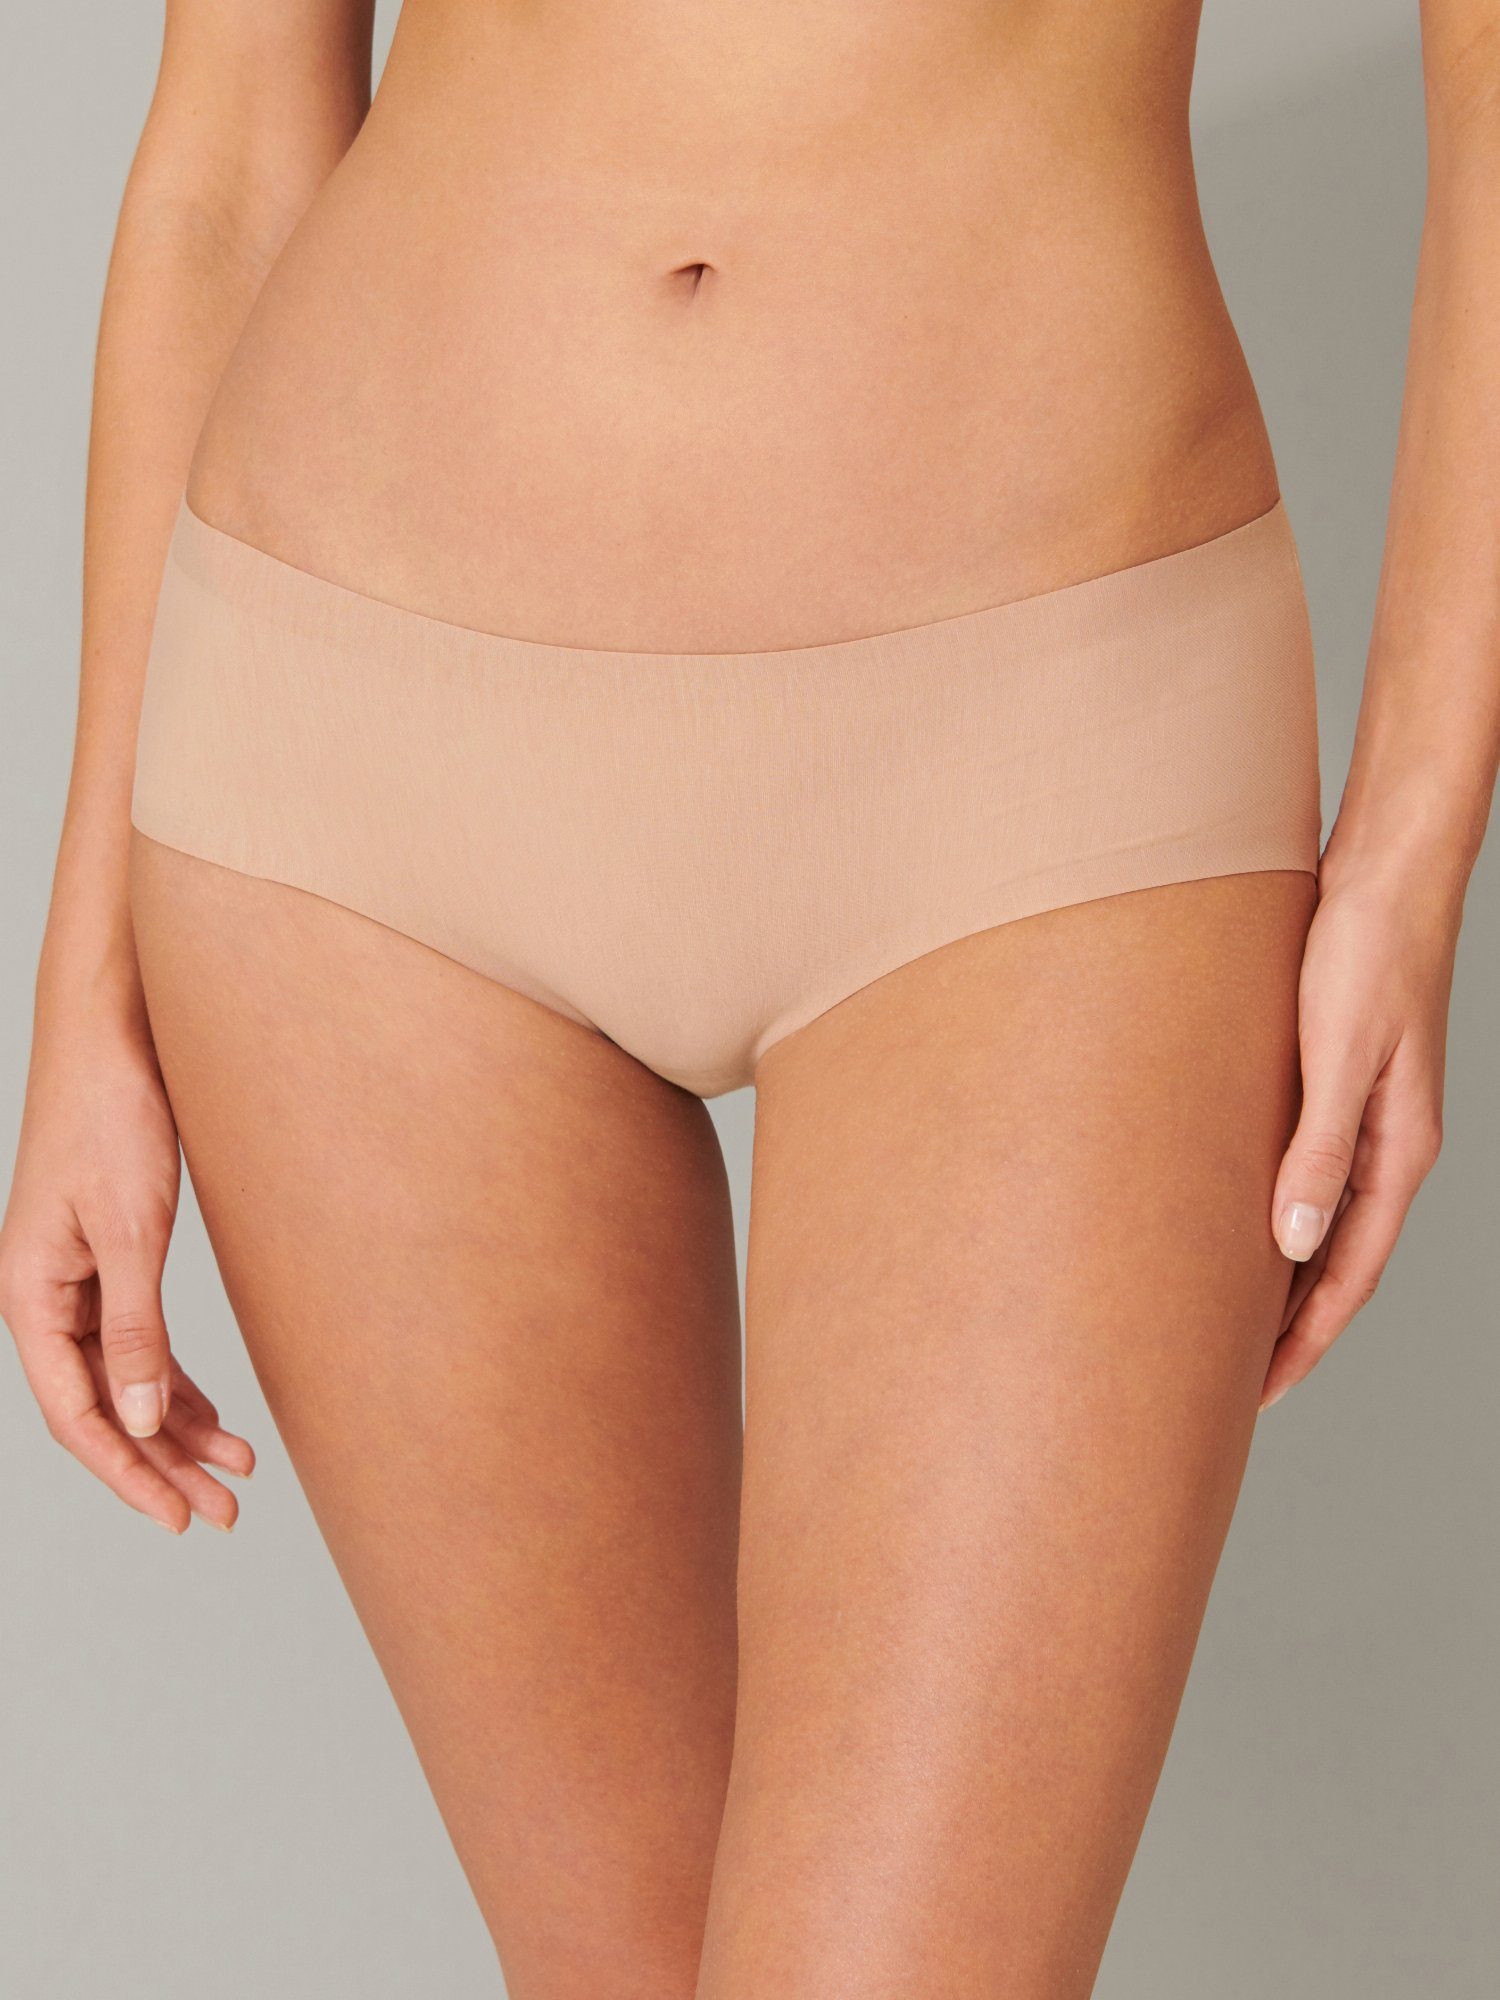 Cotton maple Schiesser Invisible Panty